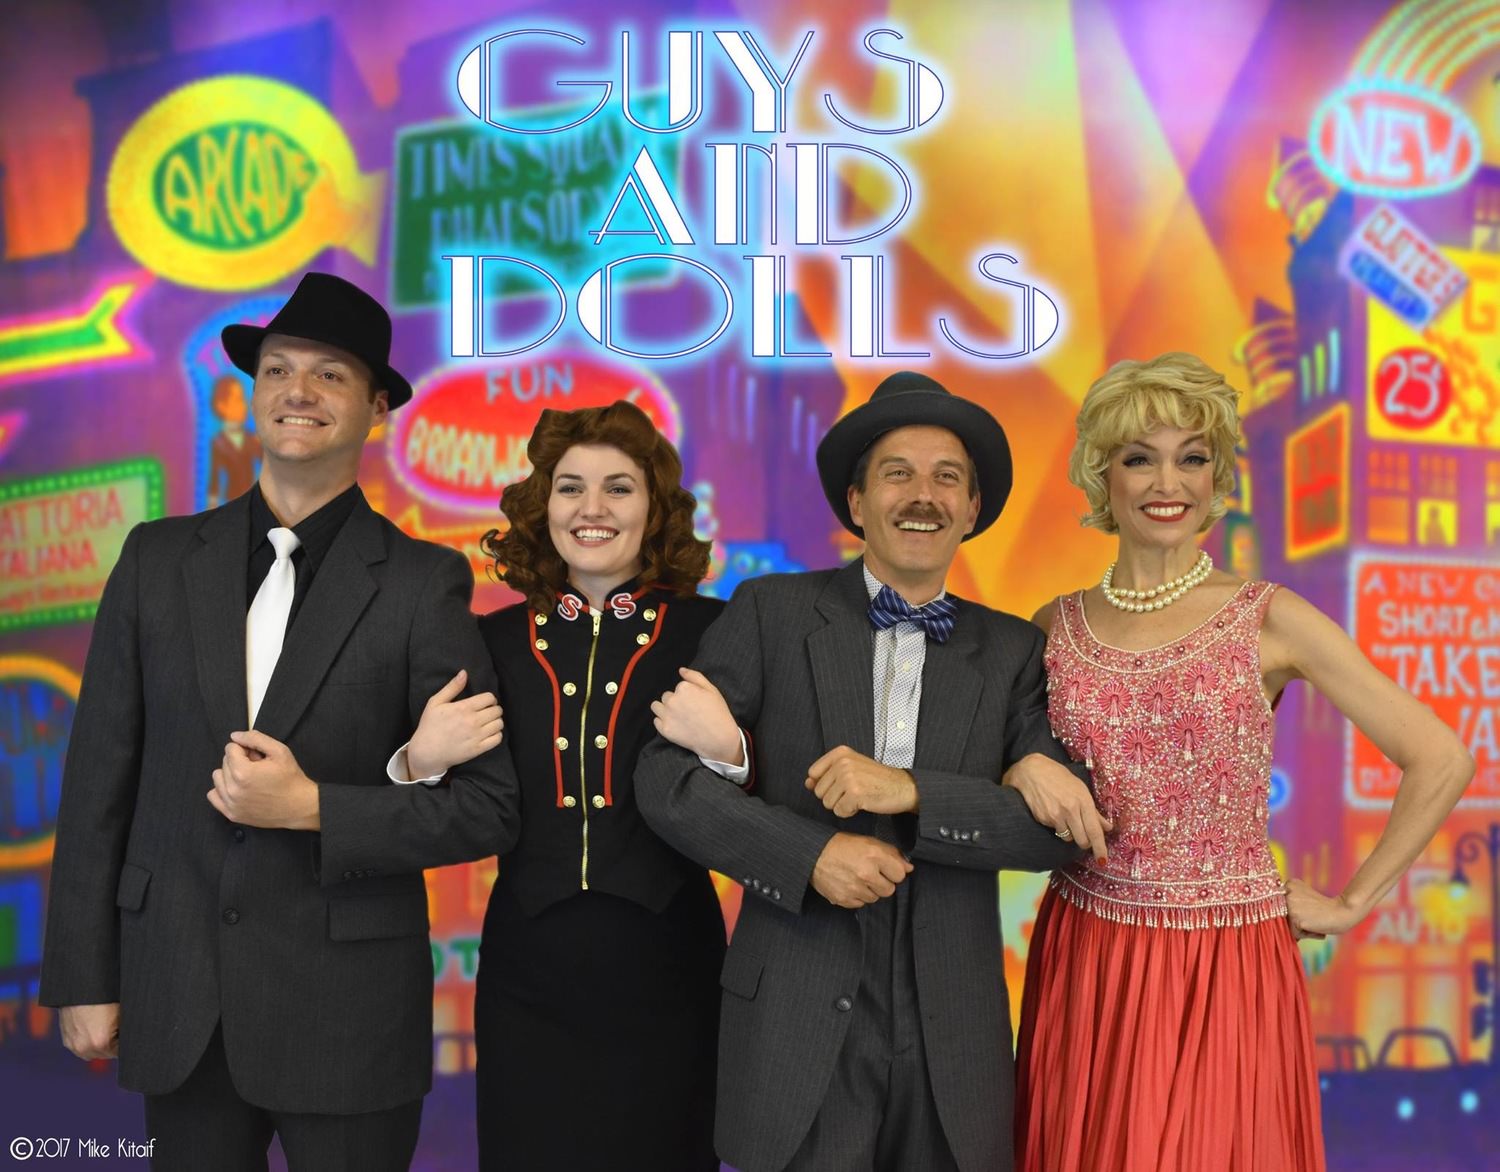 Meet Sky, Sarah, Nathan, and Adelaide in Guys and Dolls at the Athens thru May 14, 2017!
(Andrew LeJeune, Rachel Whittington, Alan Ware, Melanie Veazy)
Photo Credit: Mike Kitaif 1